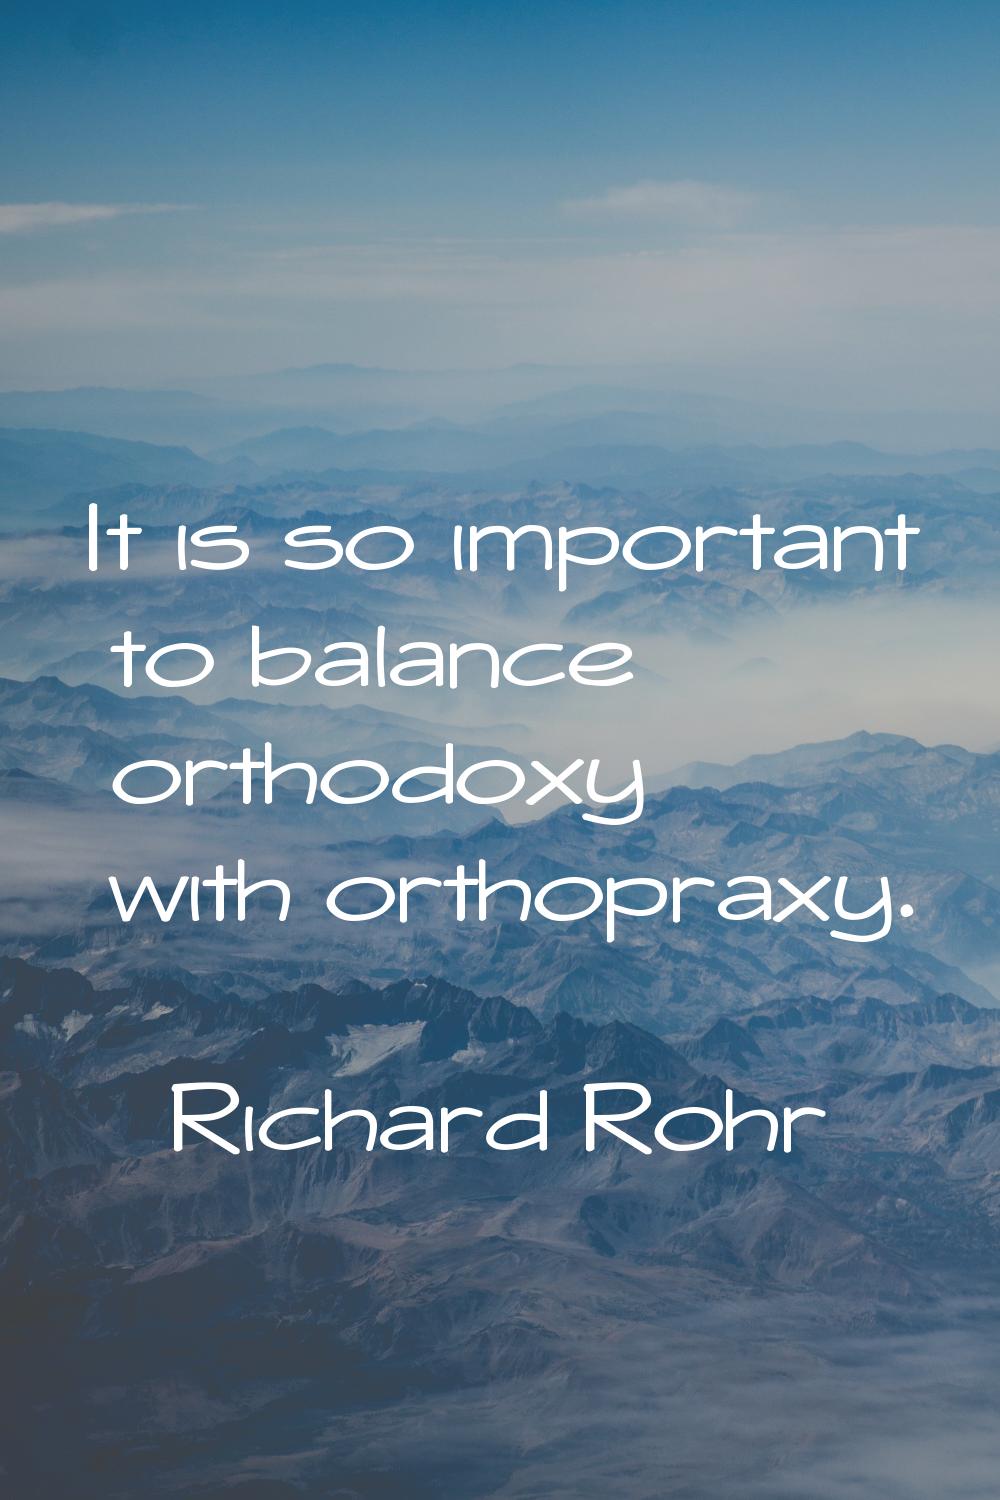 It is so important to balance orthodoxy with orthopraxy.